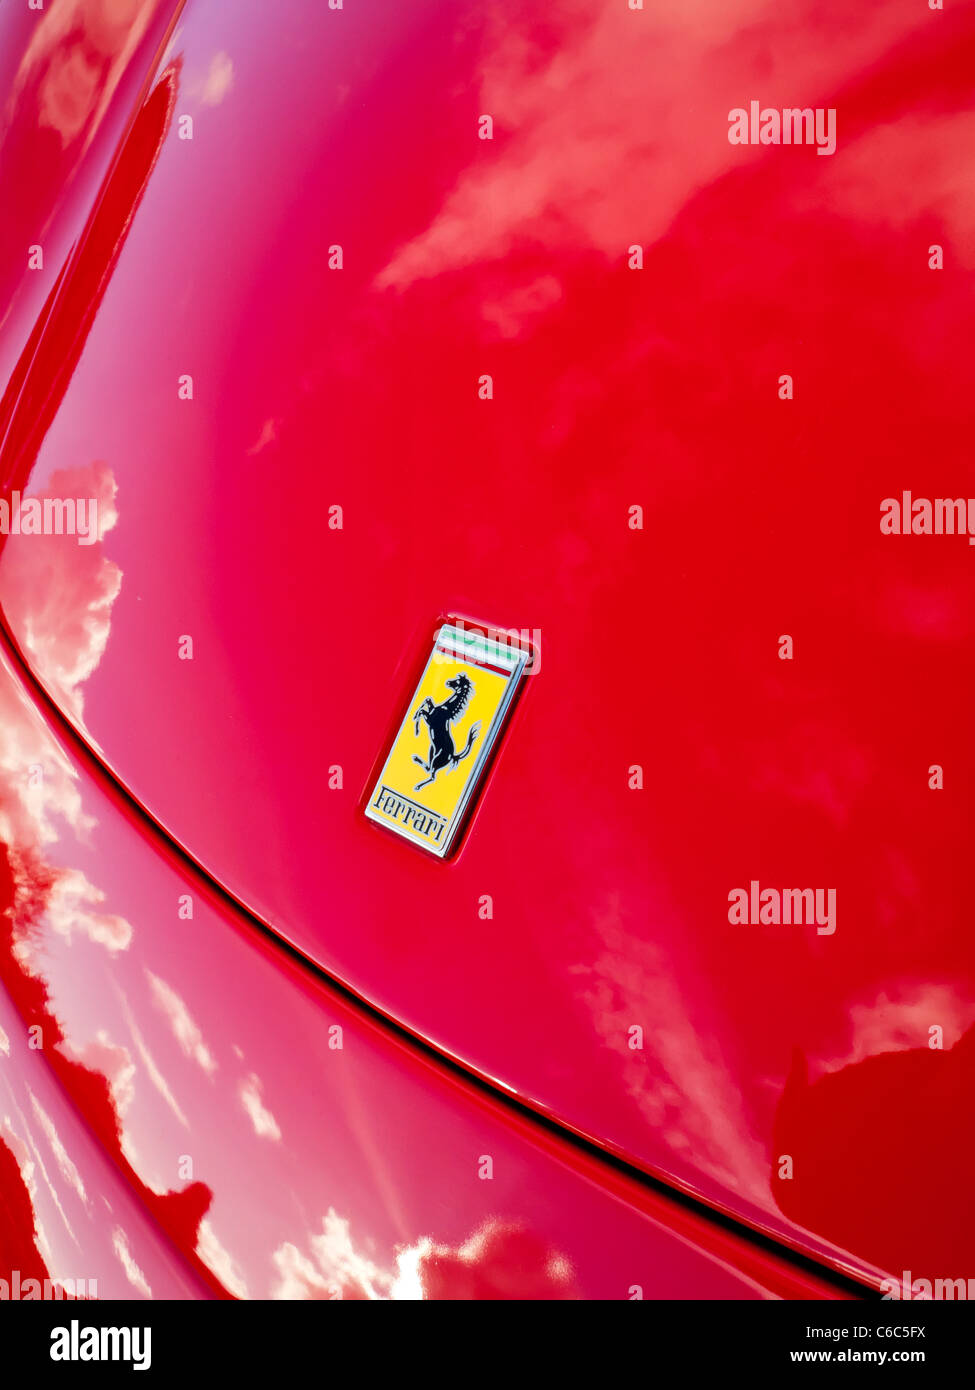 Bonnet of bright red Ferrari sports car with the company logo visible Stock Photo